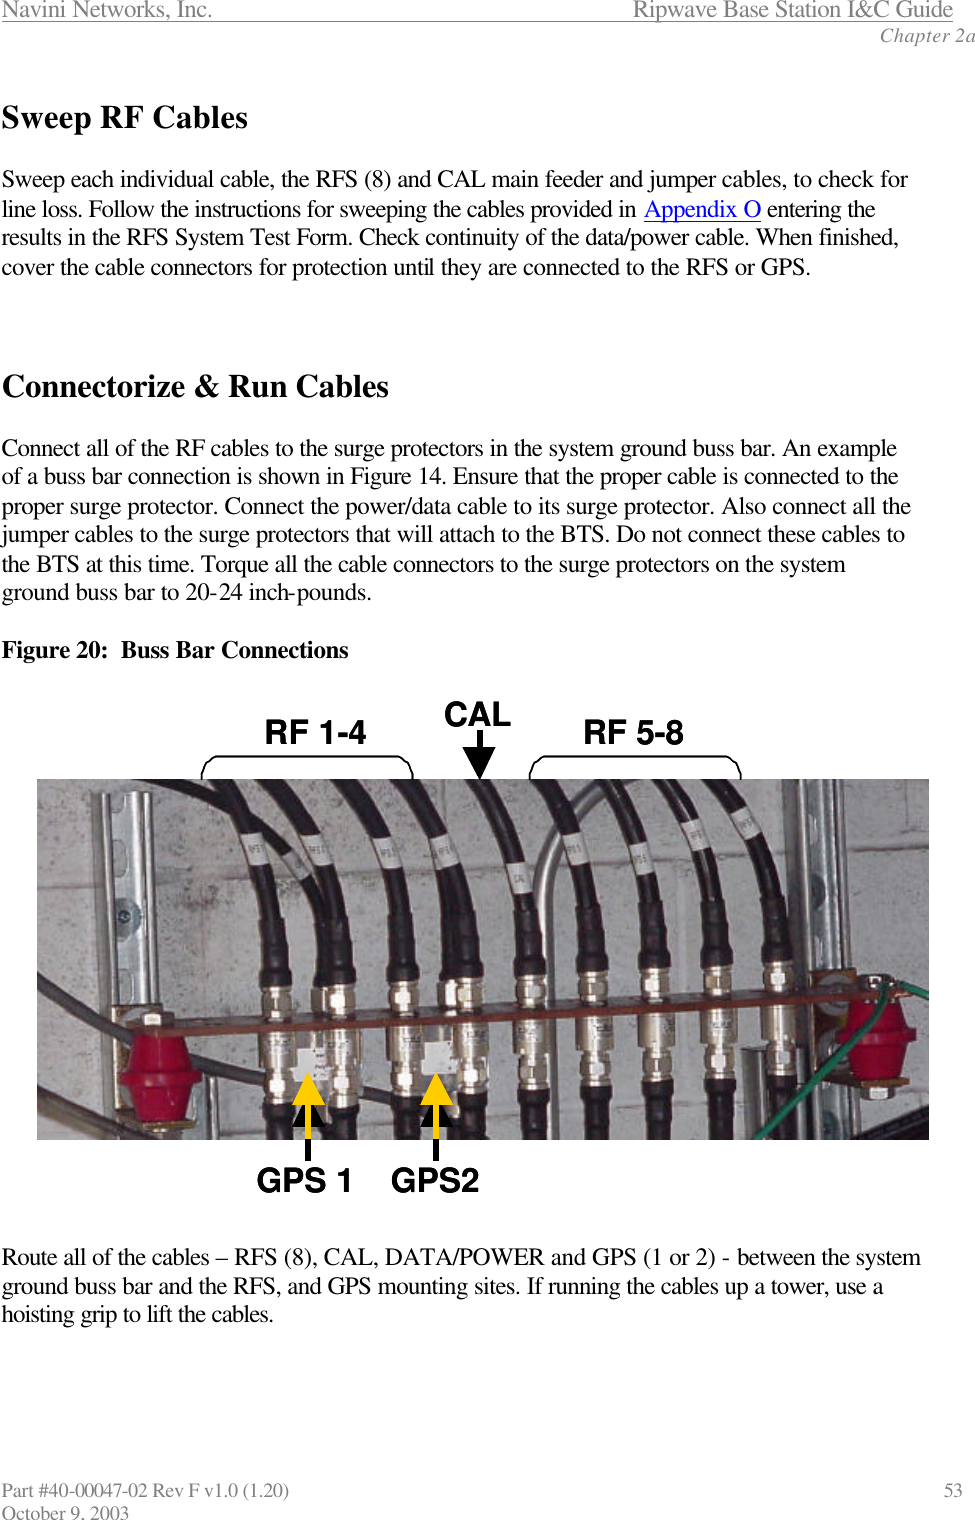 Navini Networks, Inc.                      Ripwave Base Station I&amp;C Guide Chapter 2a Part #40-00047-02 Rev F v1.0 (1.20)                             53 October 9, 2003  Sweep RF Cables  Sweep each individual cable, the RFS (8) and CAL main feeder and jumper cables, to check for line loss. Follow the instructions for sweeping the cables provided in Appendix O entering the results in the RFS System Test Form. Check continuity of the data/power cable. When finished, cover the cable connectors for protection until they are connected to the RFS or GPS.    Connectorize &amp; Run Cables   Connect all of the RF cables to the surge protectors in the system ground buss bar. An example of a buss bar connection is shown in Figure 14. Ensure that the proper cable is connected to the proper surge protector. Connect the power/data cable to its surge protector. Also connect all the jumper cables to the surge protectors that will attach to the BTS. Do not connect these cables to the BTS at this time. Torque all the cable connectors to the surge protectors on the system ground buss bar to 20-24 inch-pounds.  Figure 20:  Buss Bar Connections  Route all of the cables – RFS (8), CAL, DATA/POWER and GPS (1 or 2) - between the system ground buss bar and the RFS, and GPS mounting sites. If running the cables up a tower, use a hoisting grip to lift the cables.   GPS 1 GPS2RF 1-4RF 5-8CALGPS 1 GPS2RF 1-4RF 5-8CAL